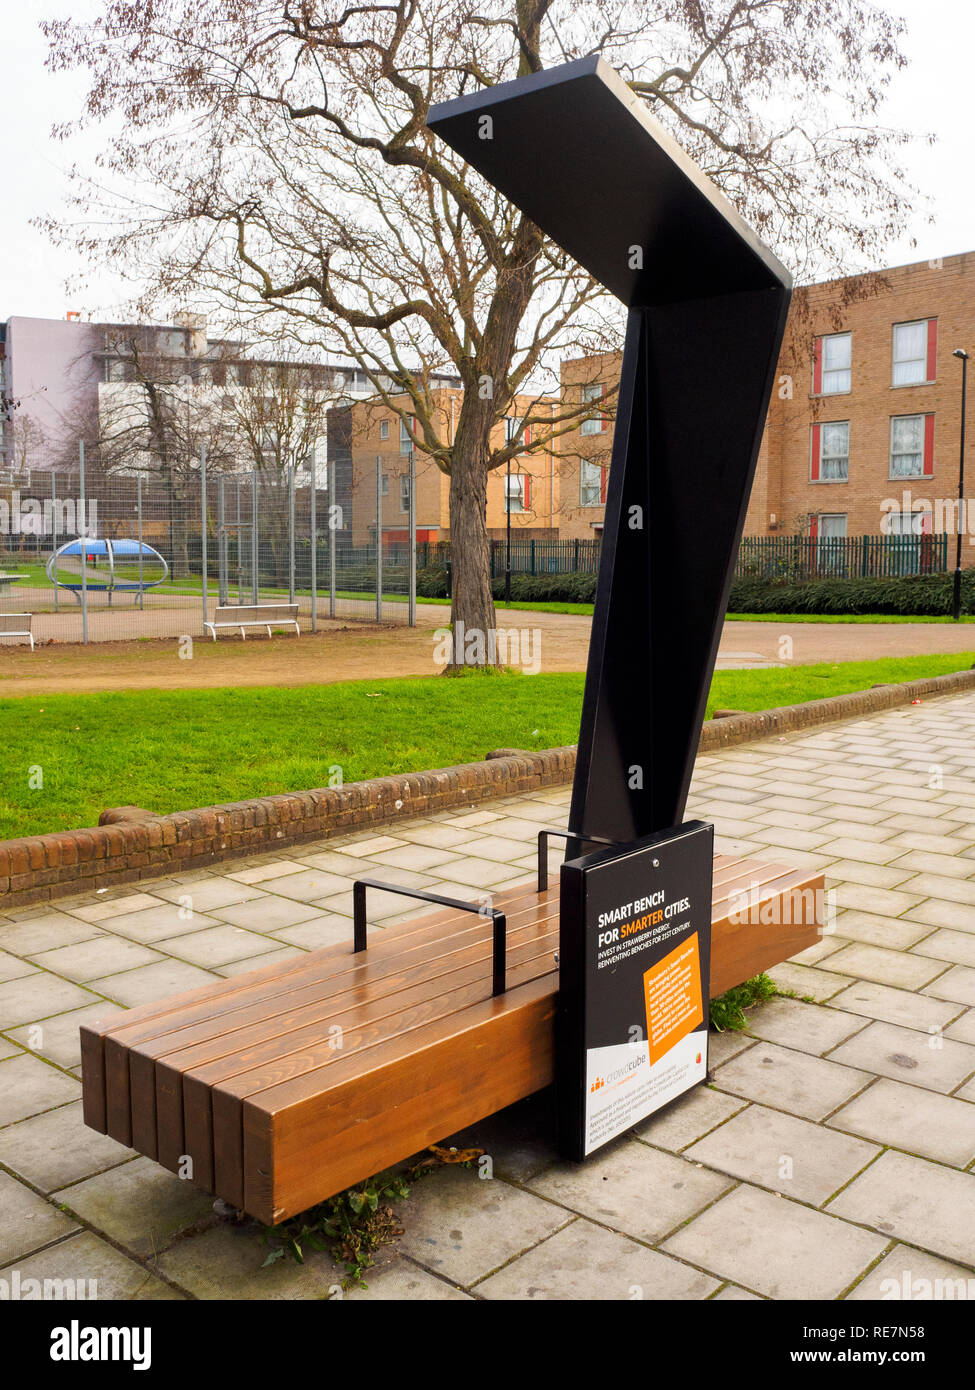 Public solar-powered 'smart bench' for charging mobile devices and wi-fi internet connection in Deptford - South East London, England Stock Photo